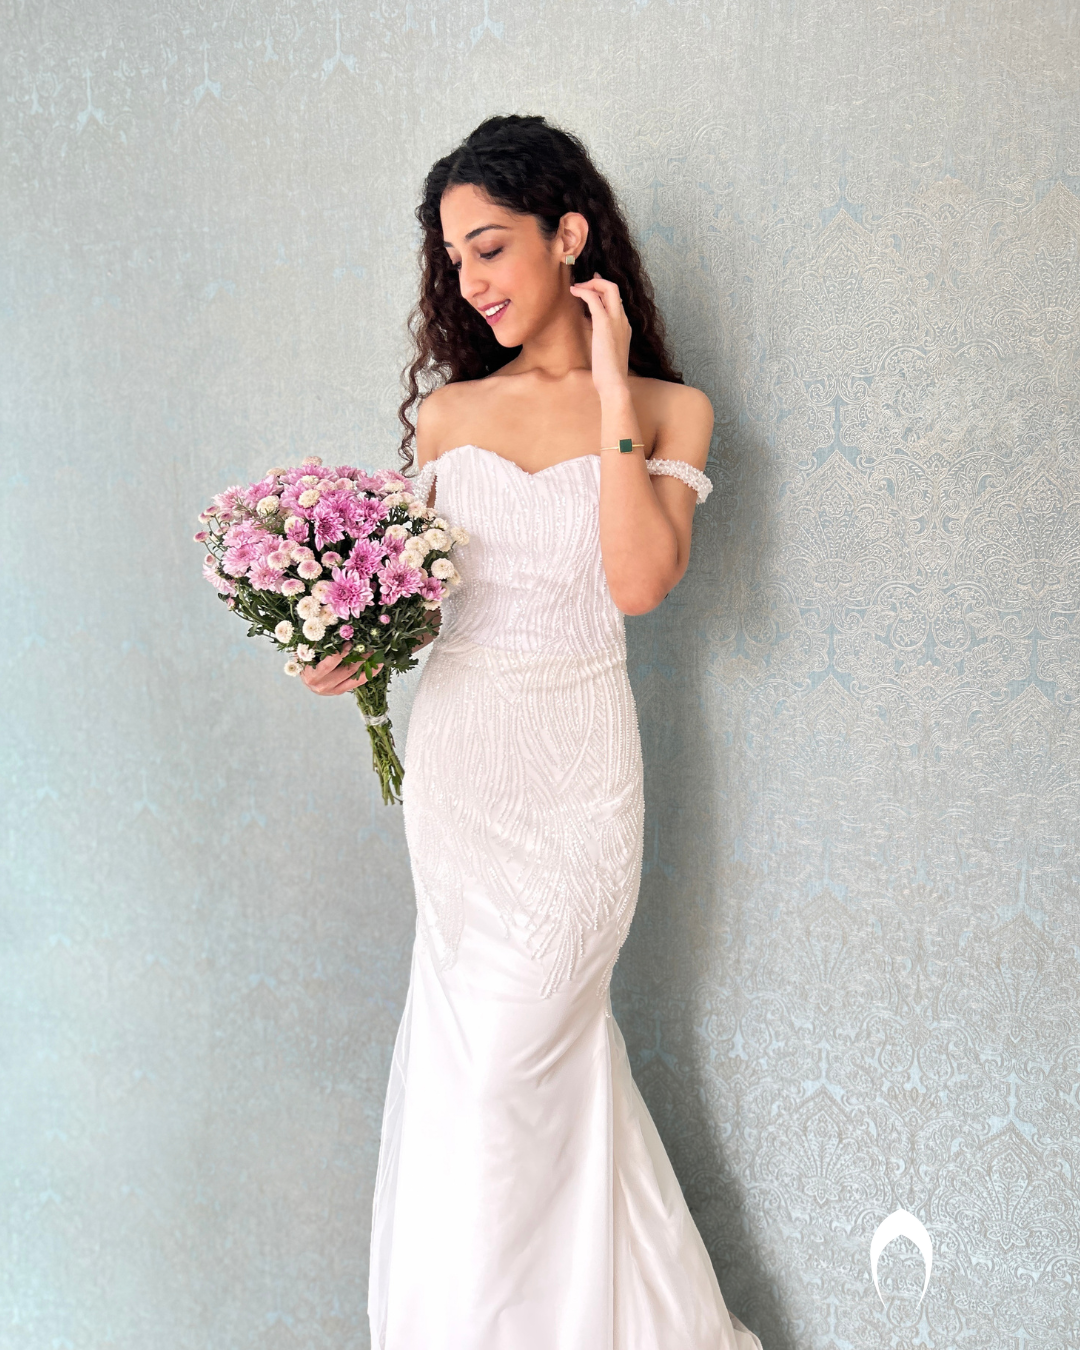 Signature christian bridal mermaid off shoulder gown with embellished net